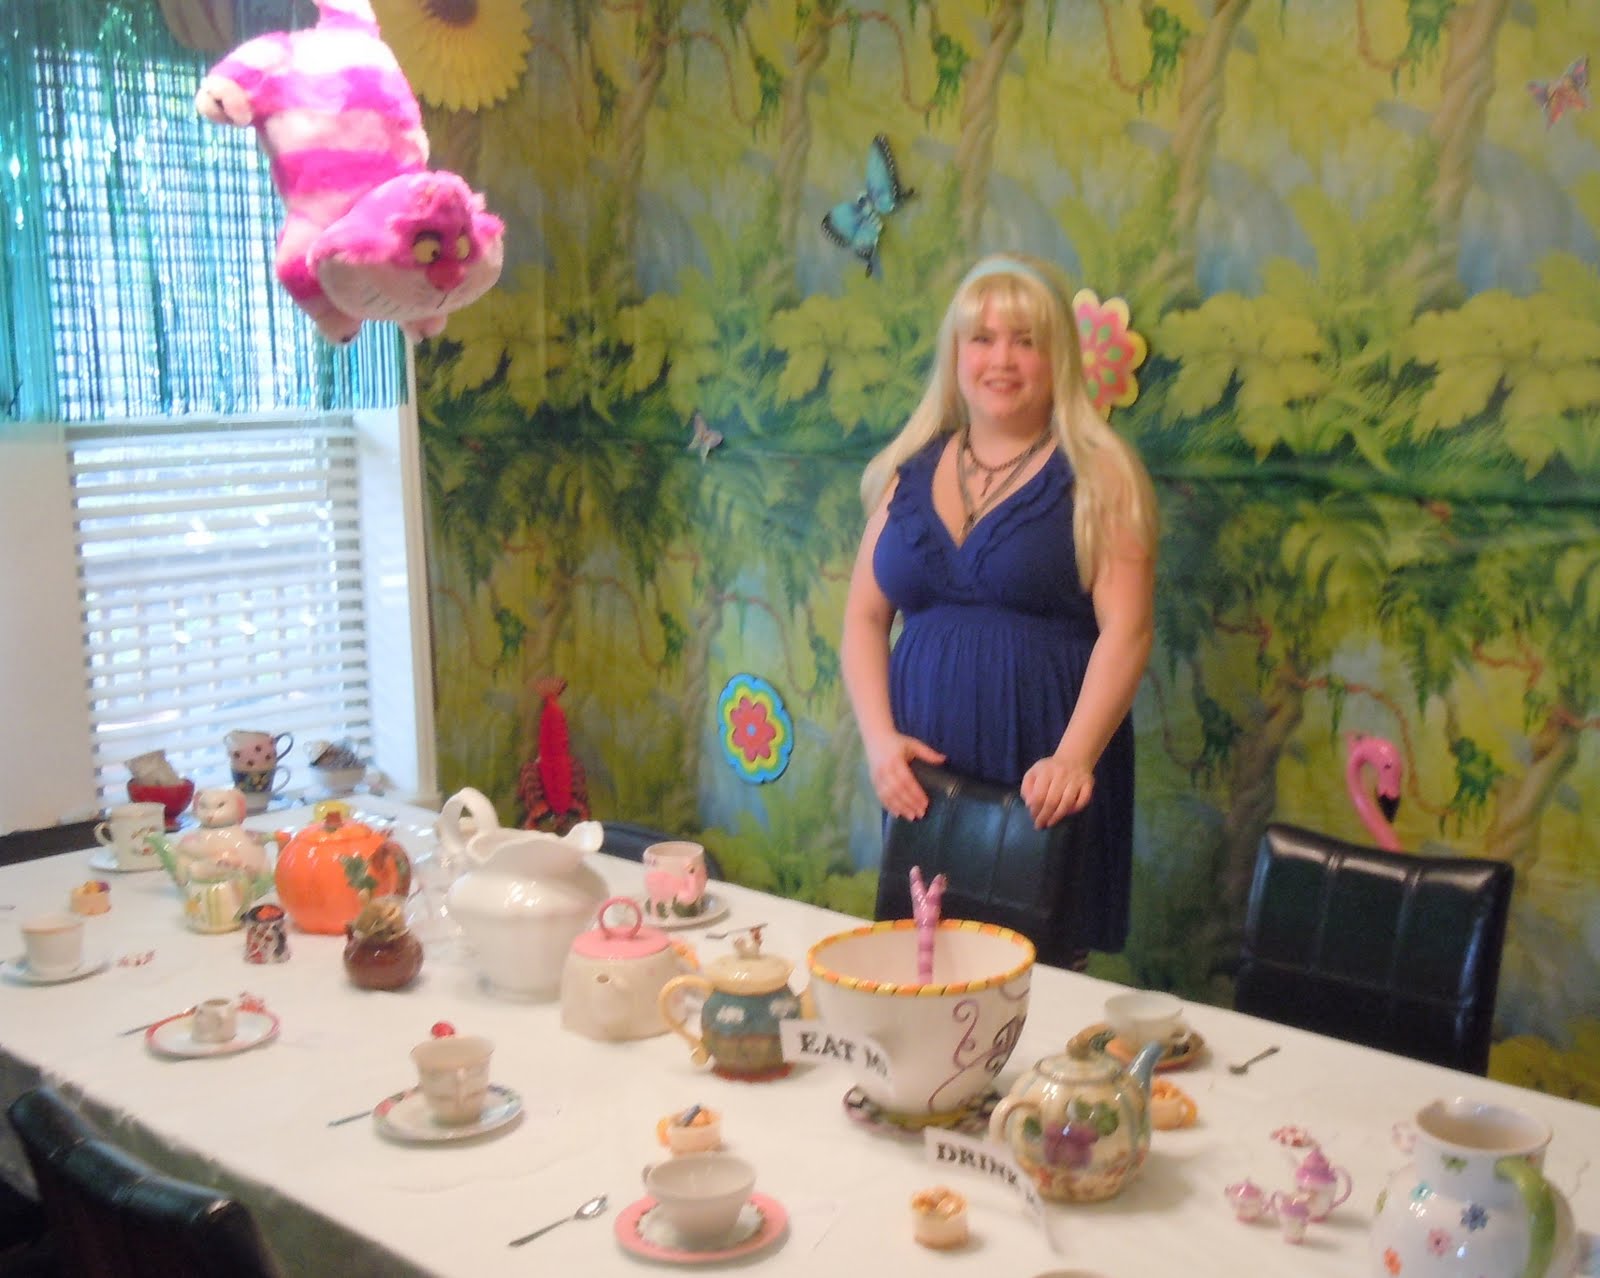 Kara's Party Ideas Mad Hatter Girl Whimsical Tea Party Planning